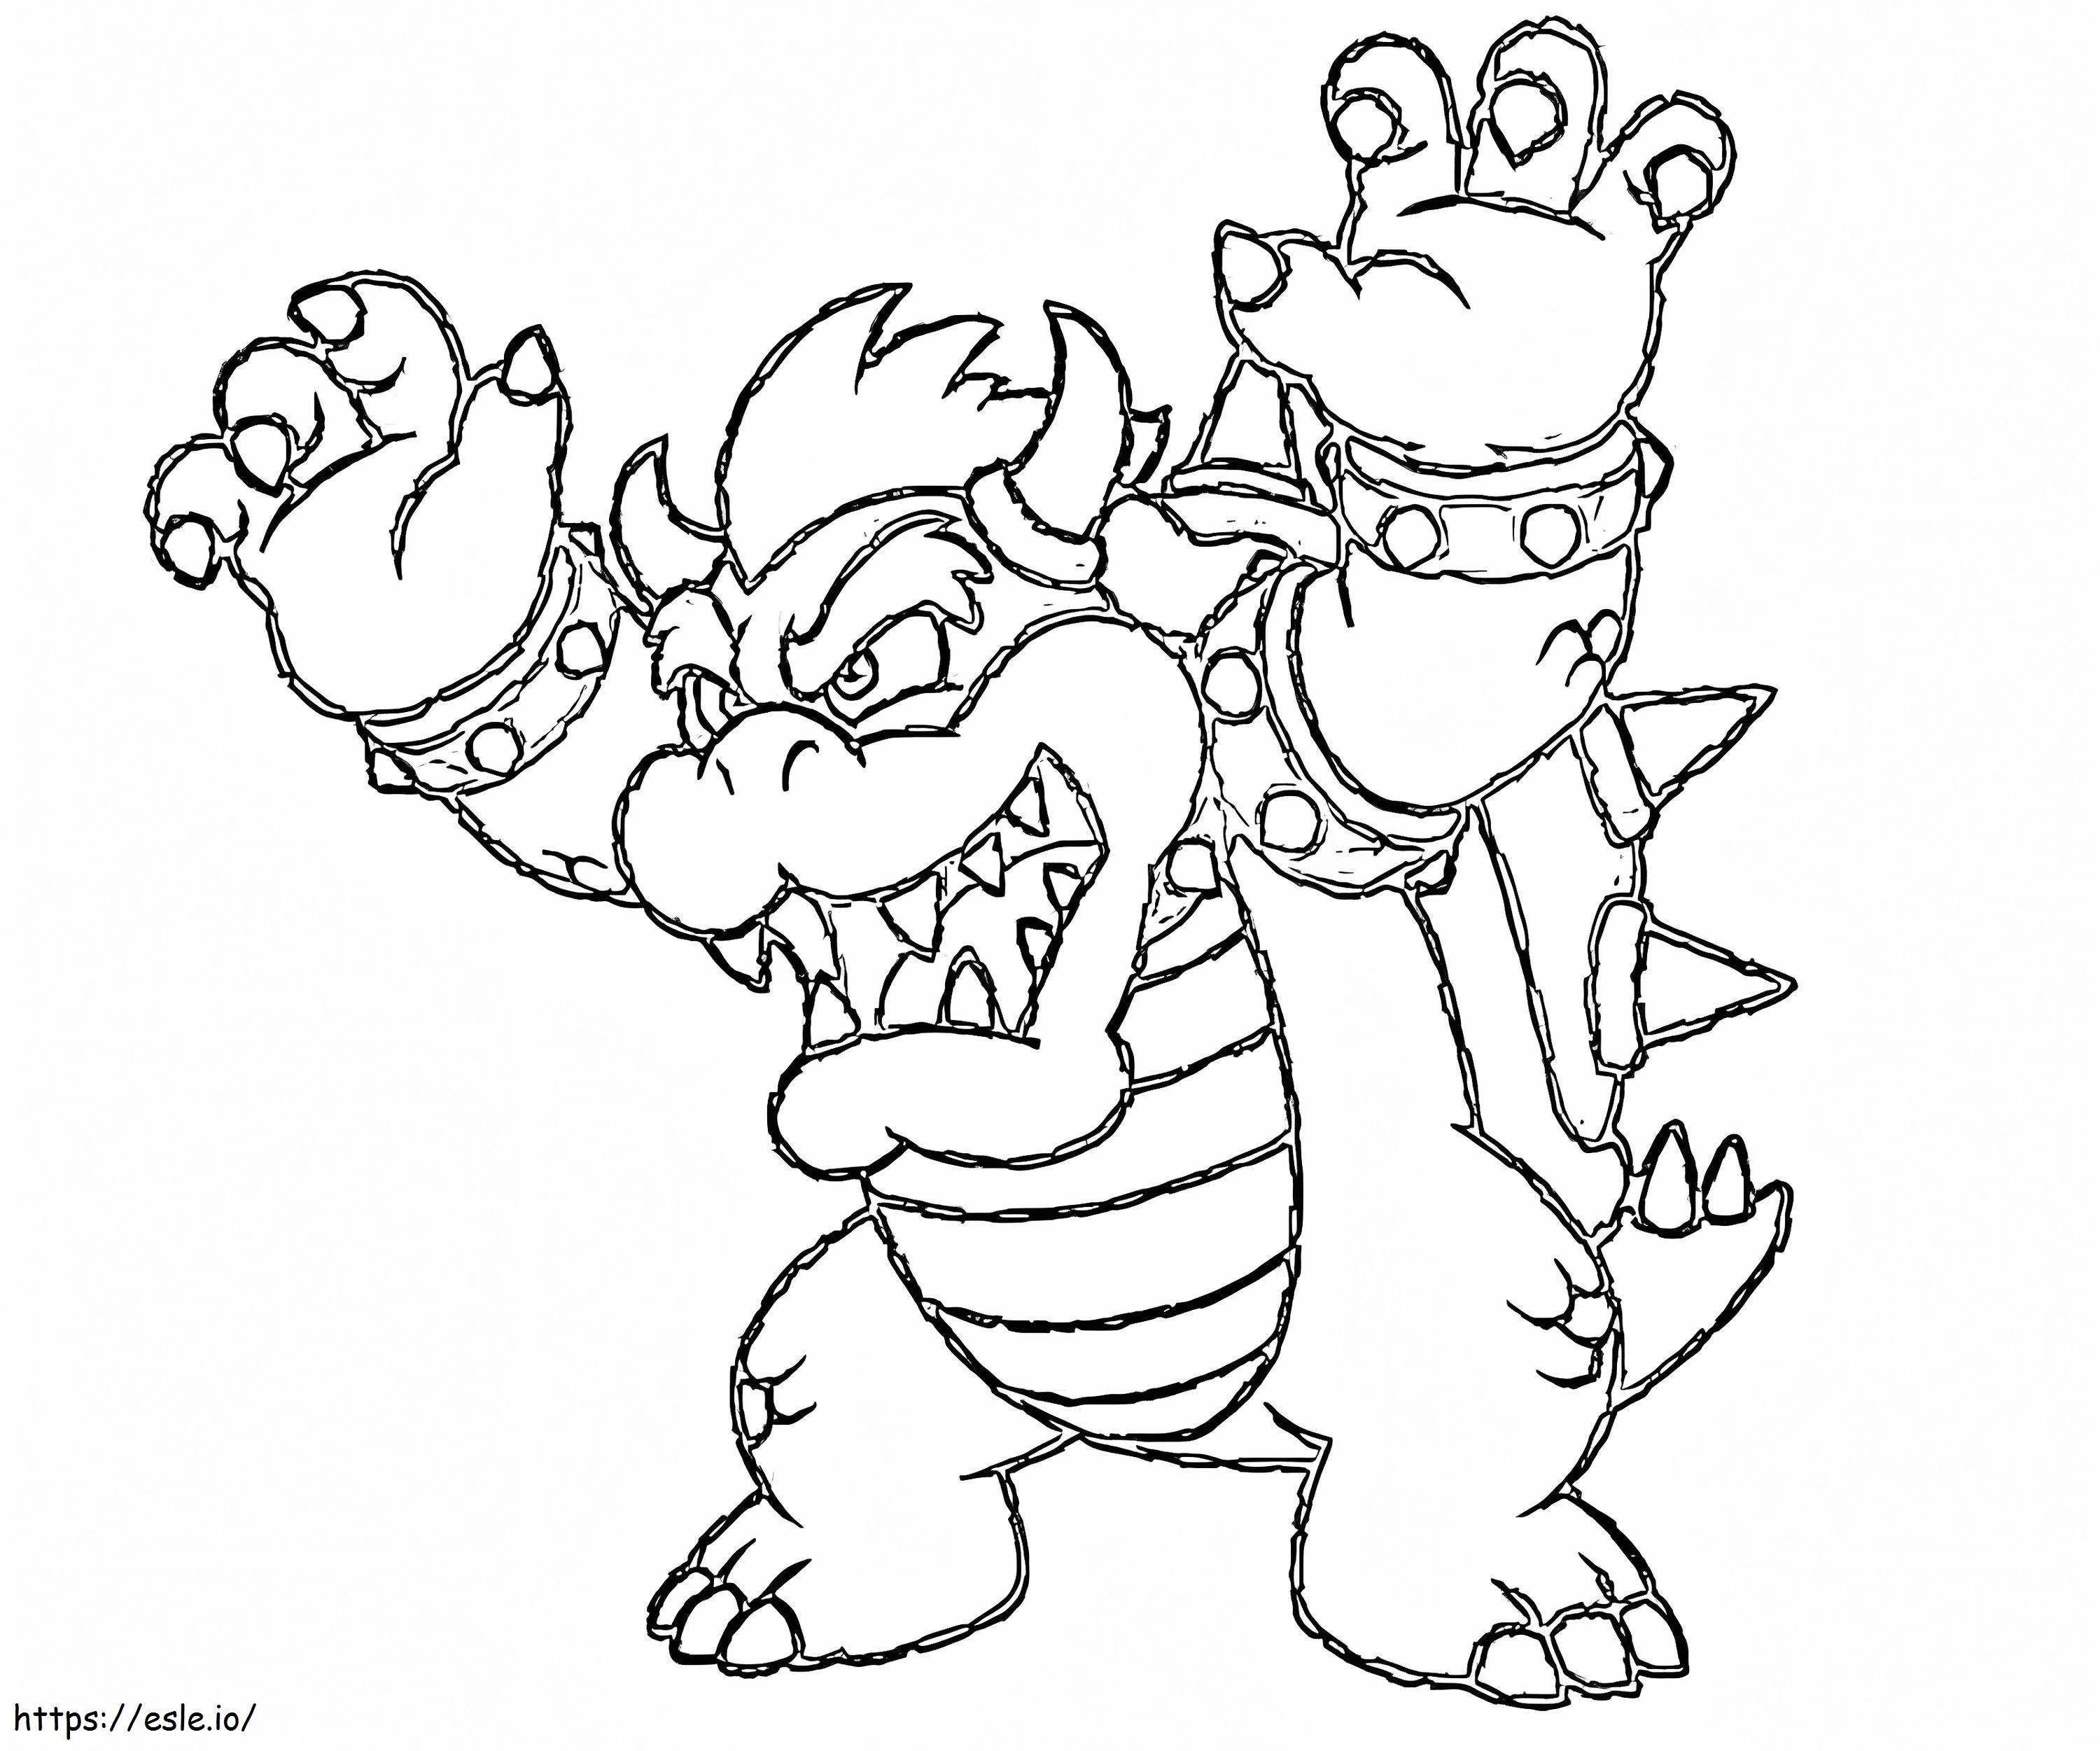 Bowser 9 coloring page